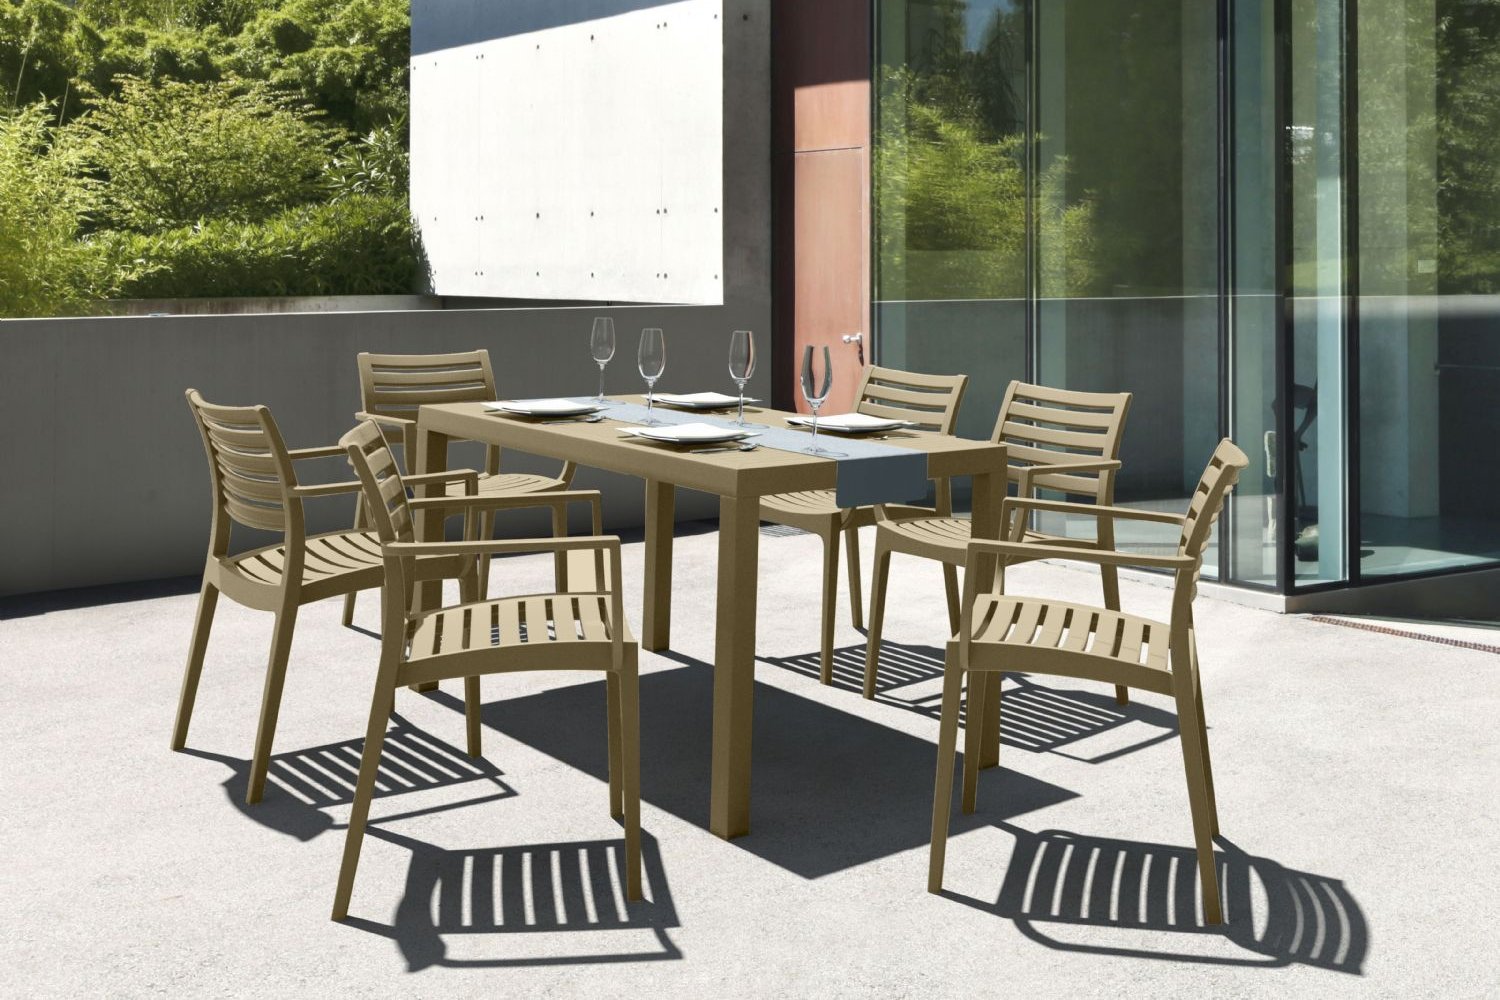 Artemis Resin Rectangle Outdoor Dining Set 7 Piece with Arm Chairs Brown ISP1862S-BRW - 6